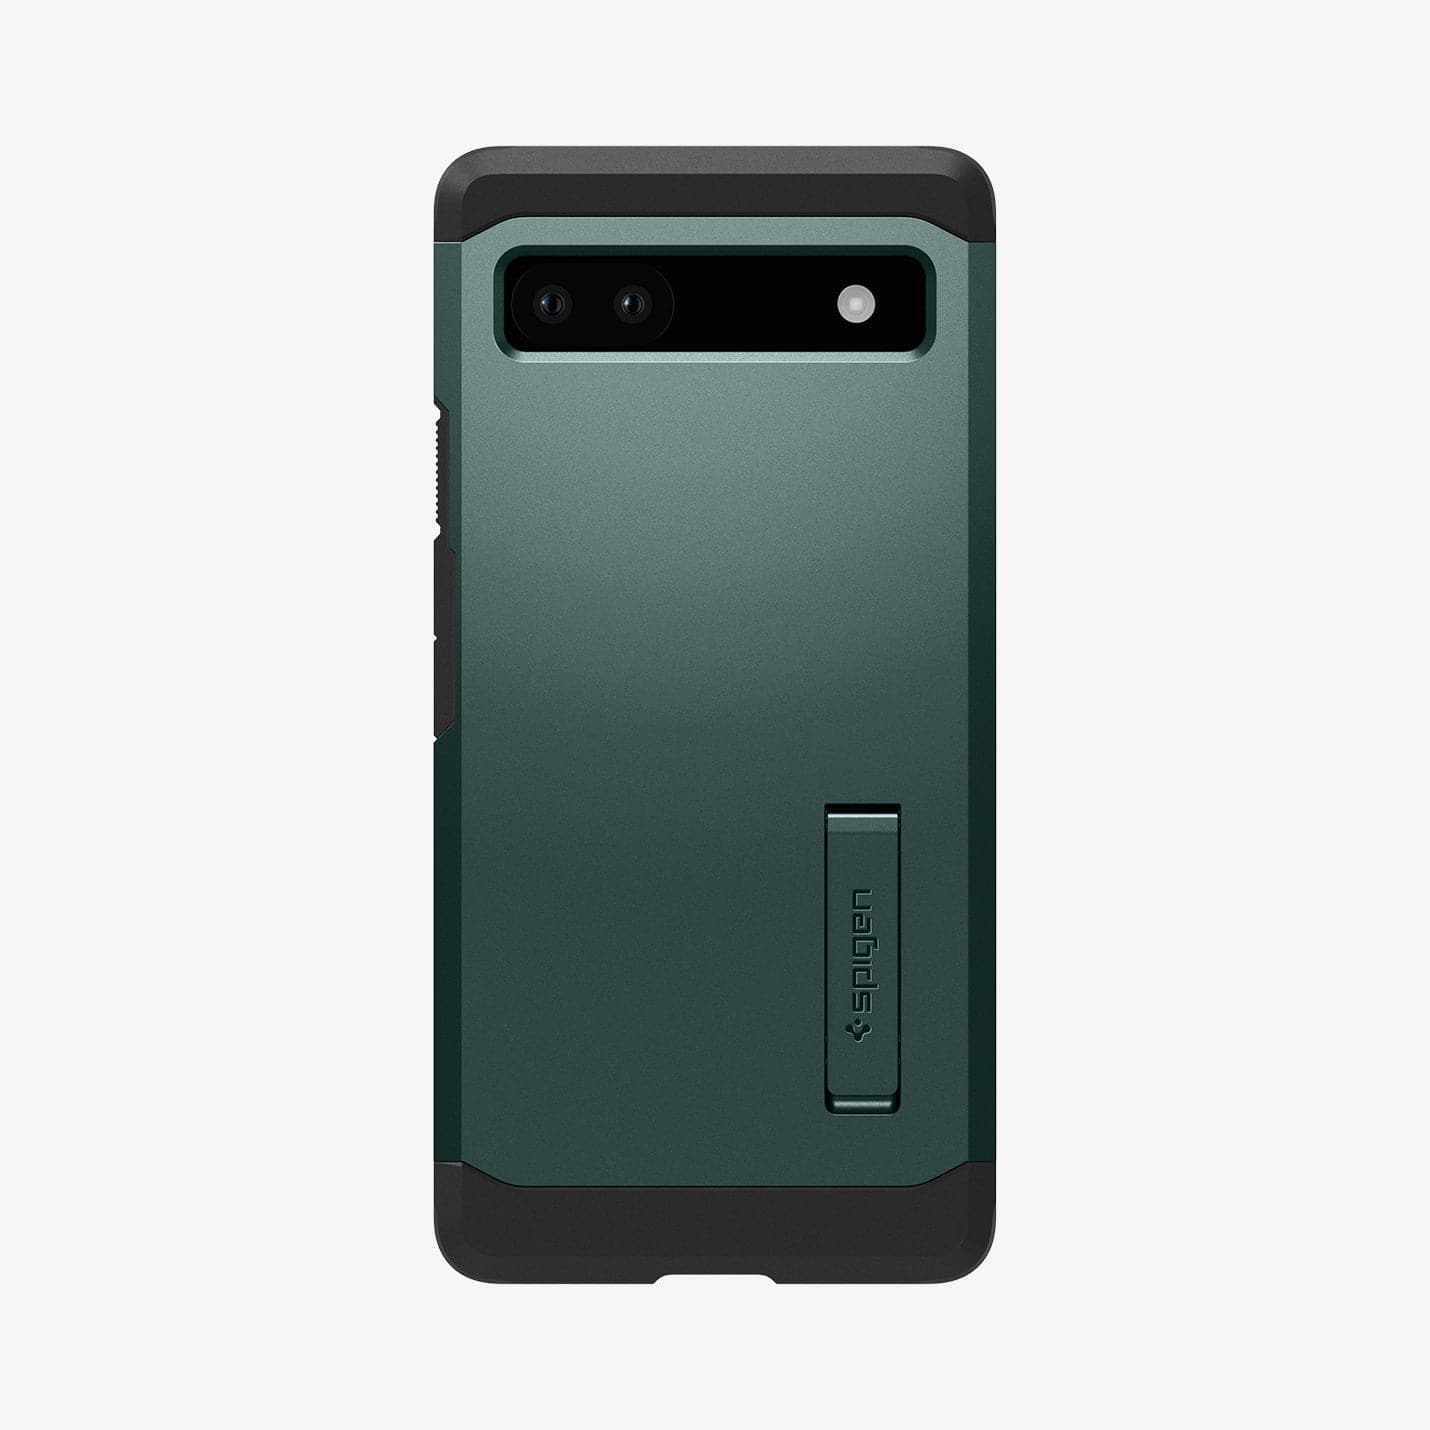 ACS04481 - Pixel 6a Case Tough Armor in midnight green showing the back